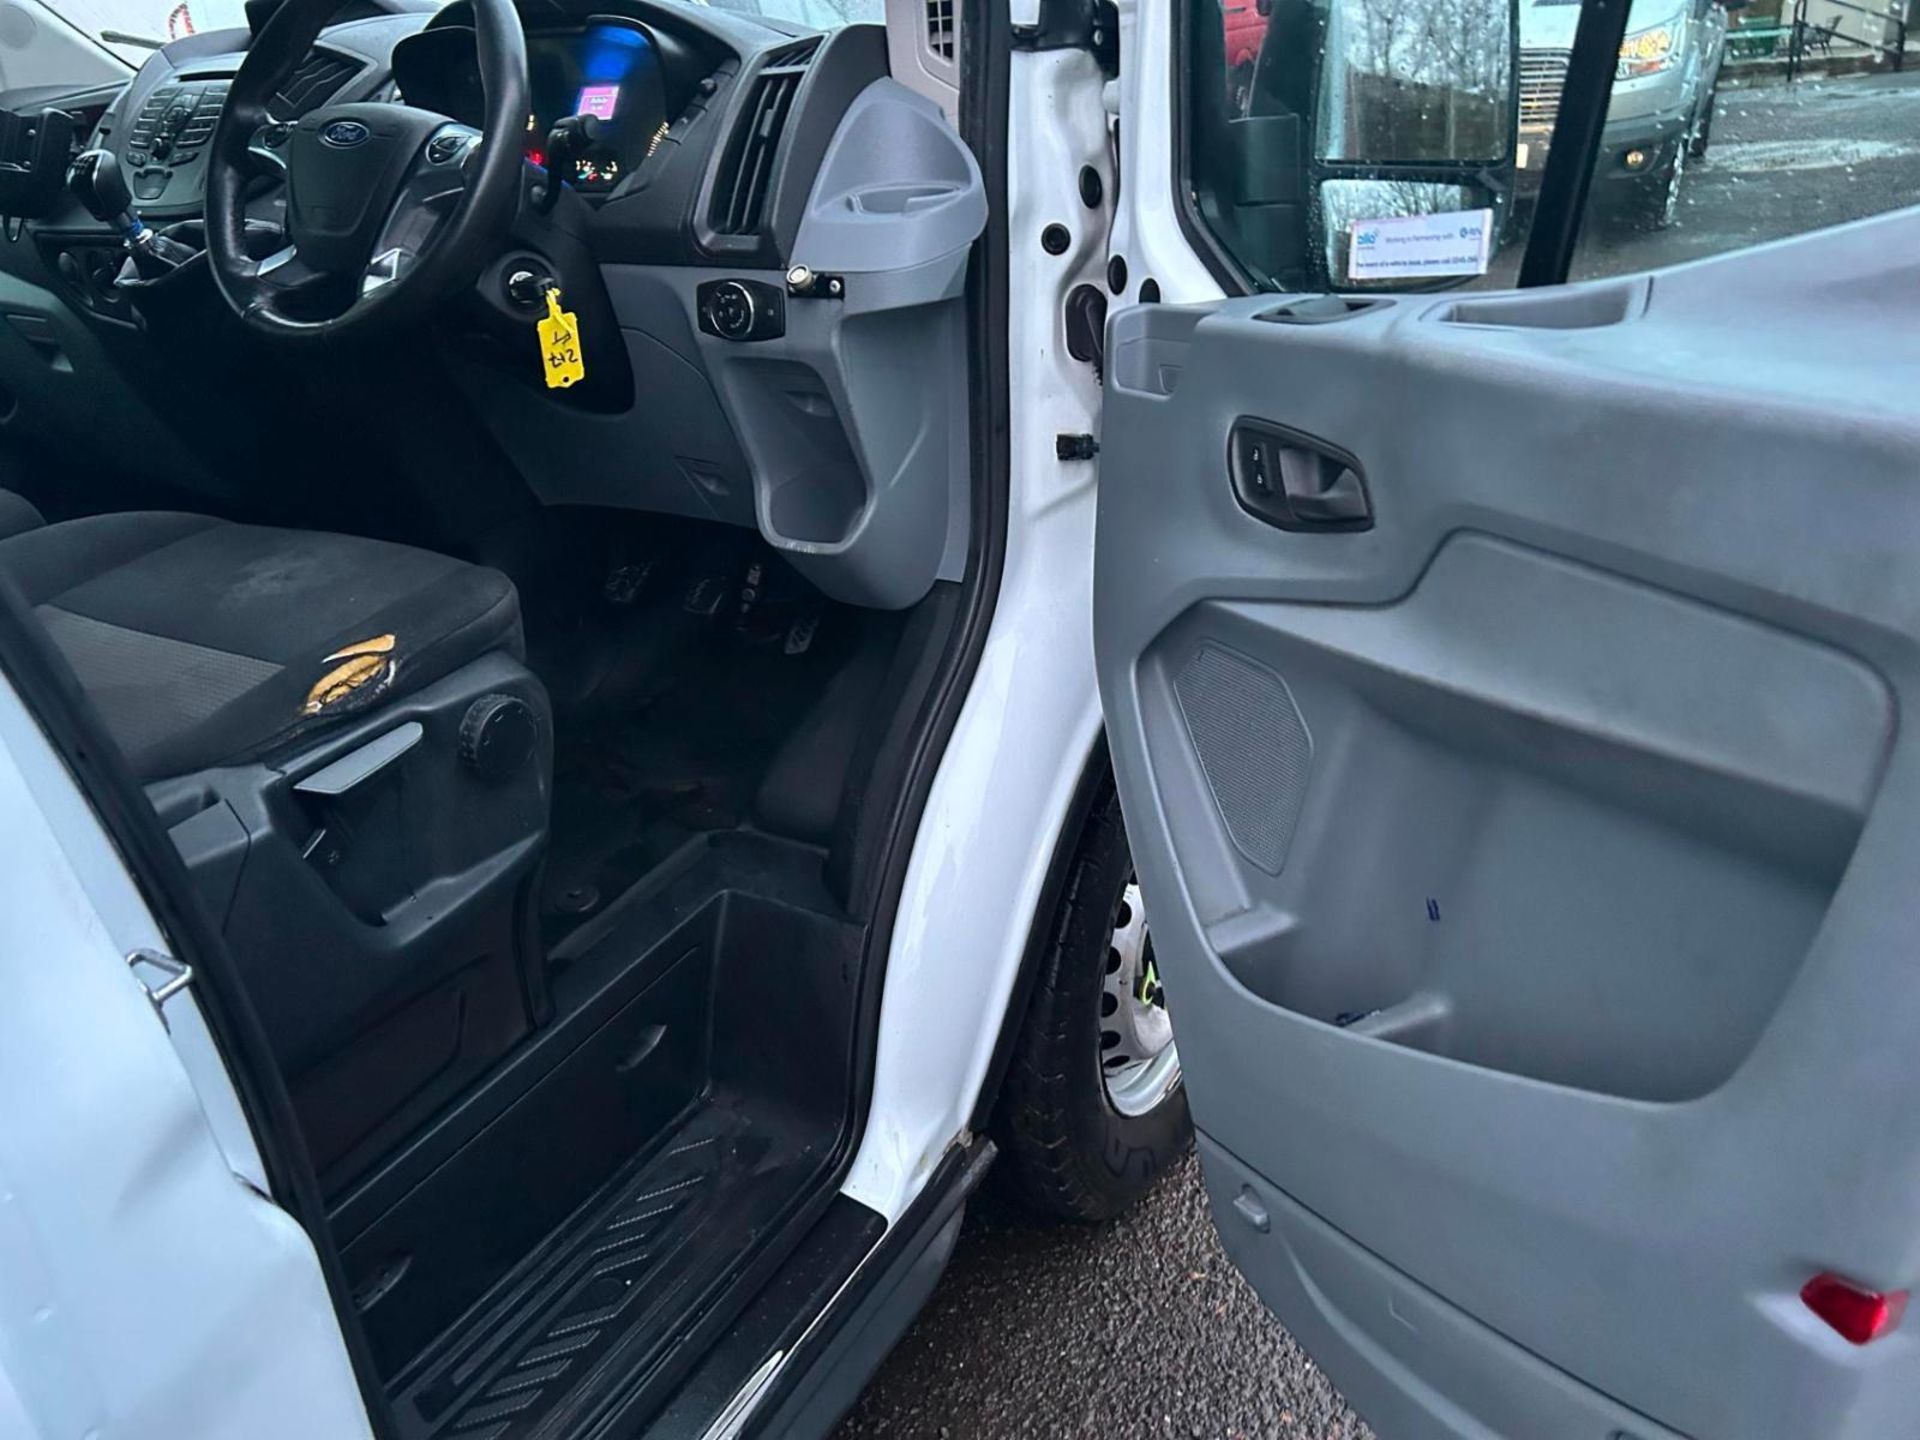 >>>SPECIAL CLEARANCE<<< 2018 FORD TRANSIT 2.0 TDCI 130PS L3 H3 PANEL VAN - Image 8 of 13